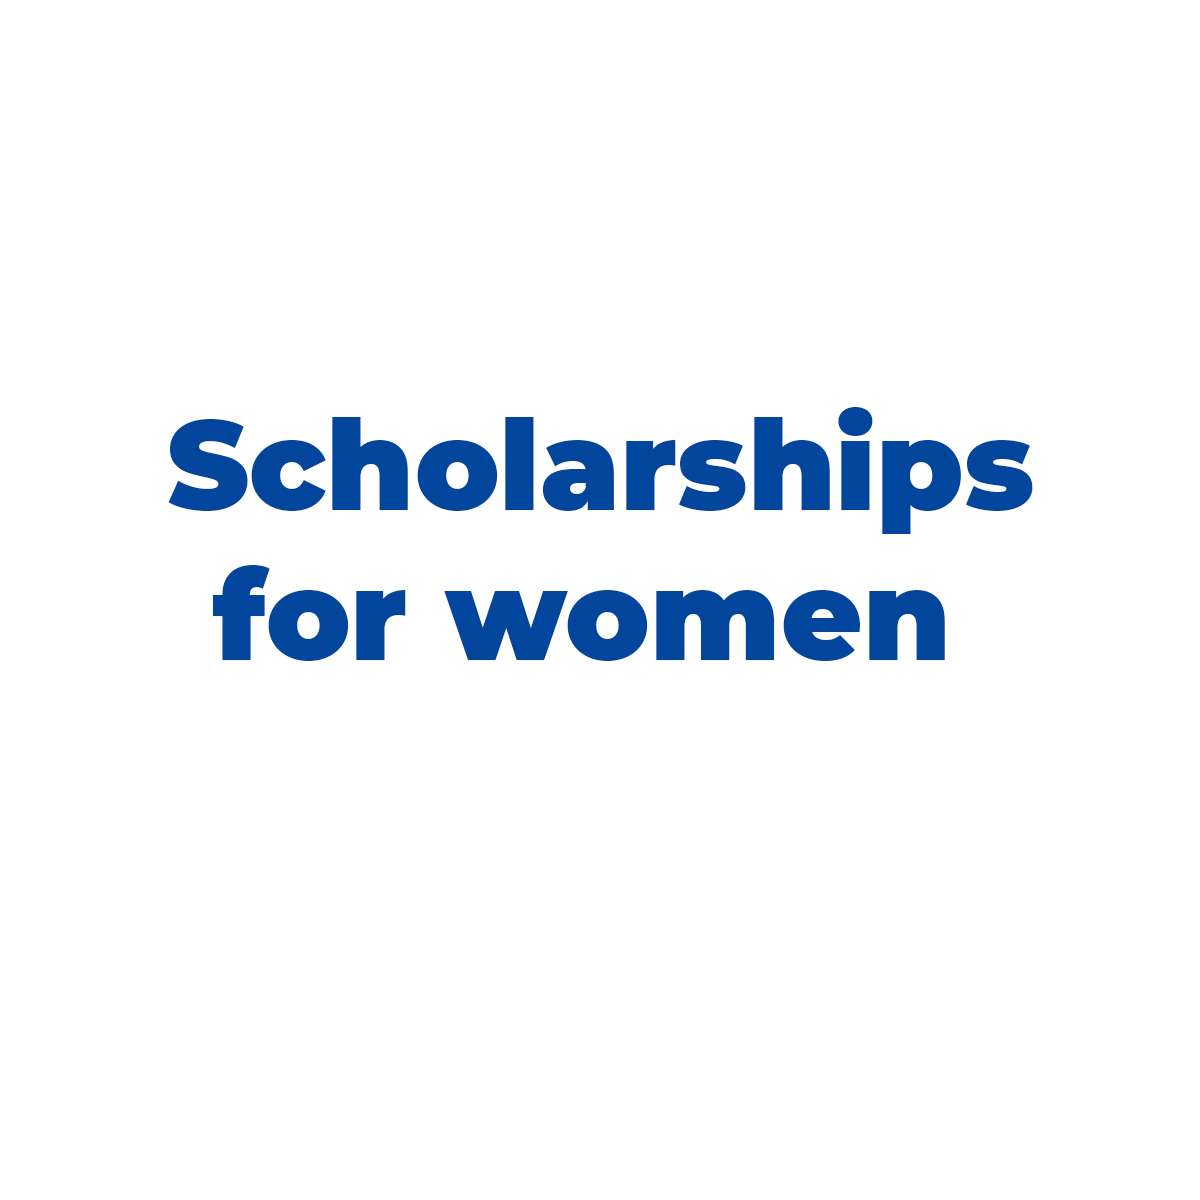 Breaking Barriers: Scholarships for Women to Achieve Their Dreams